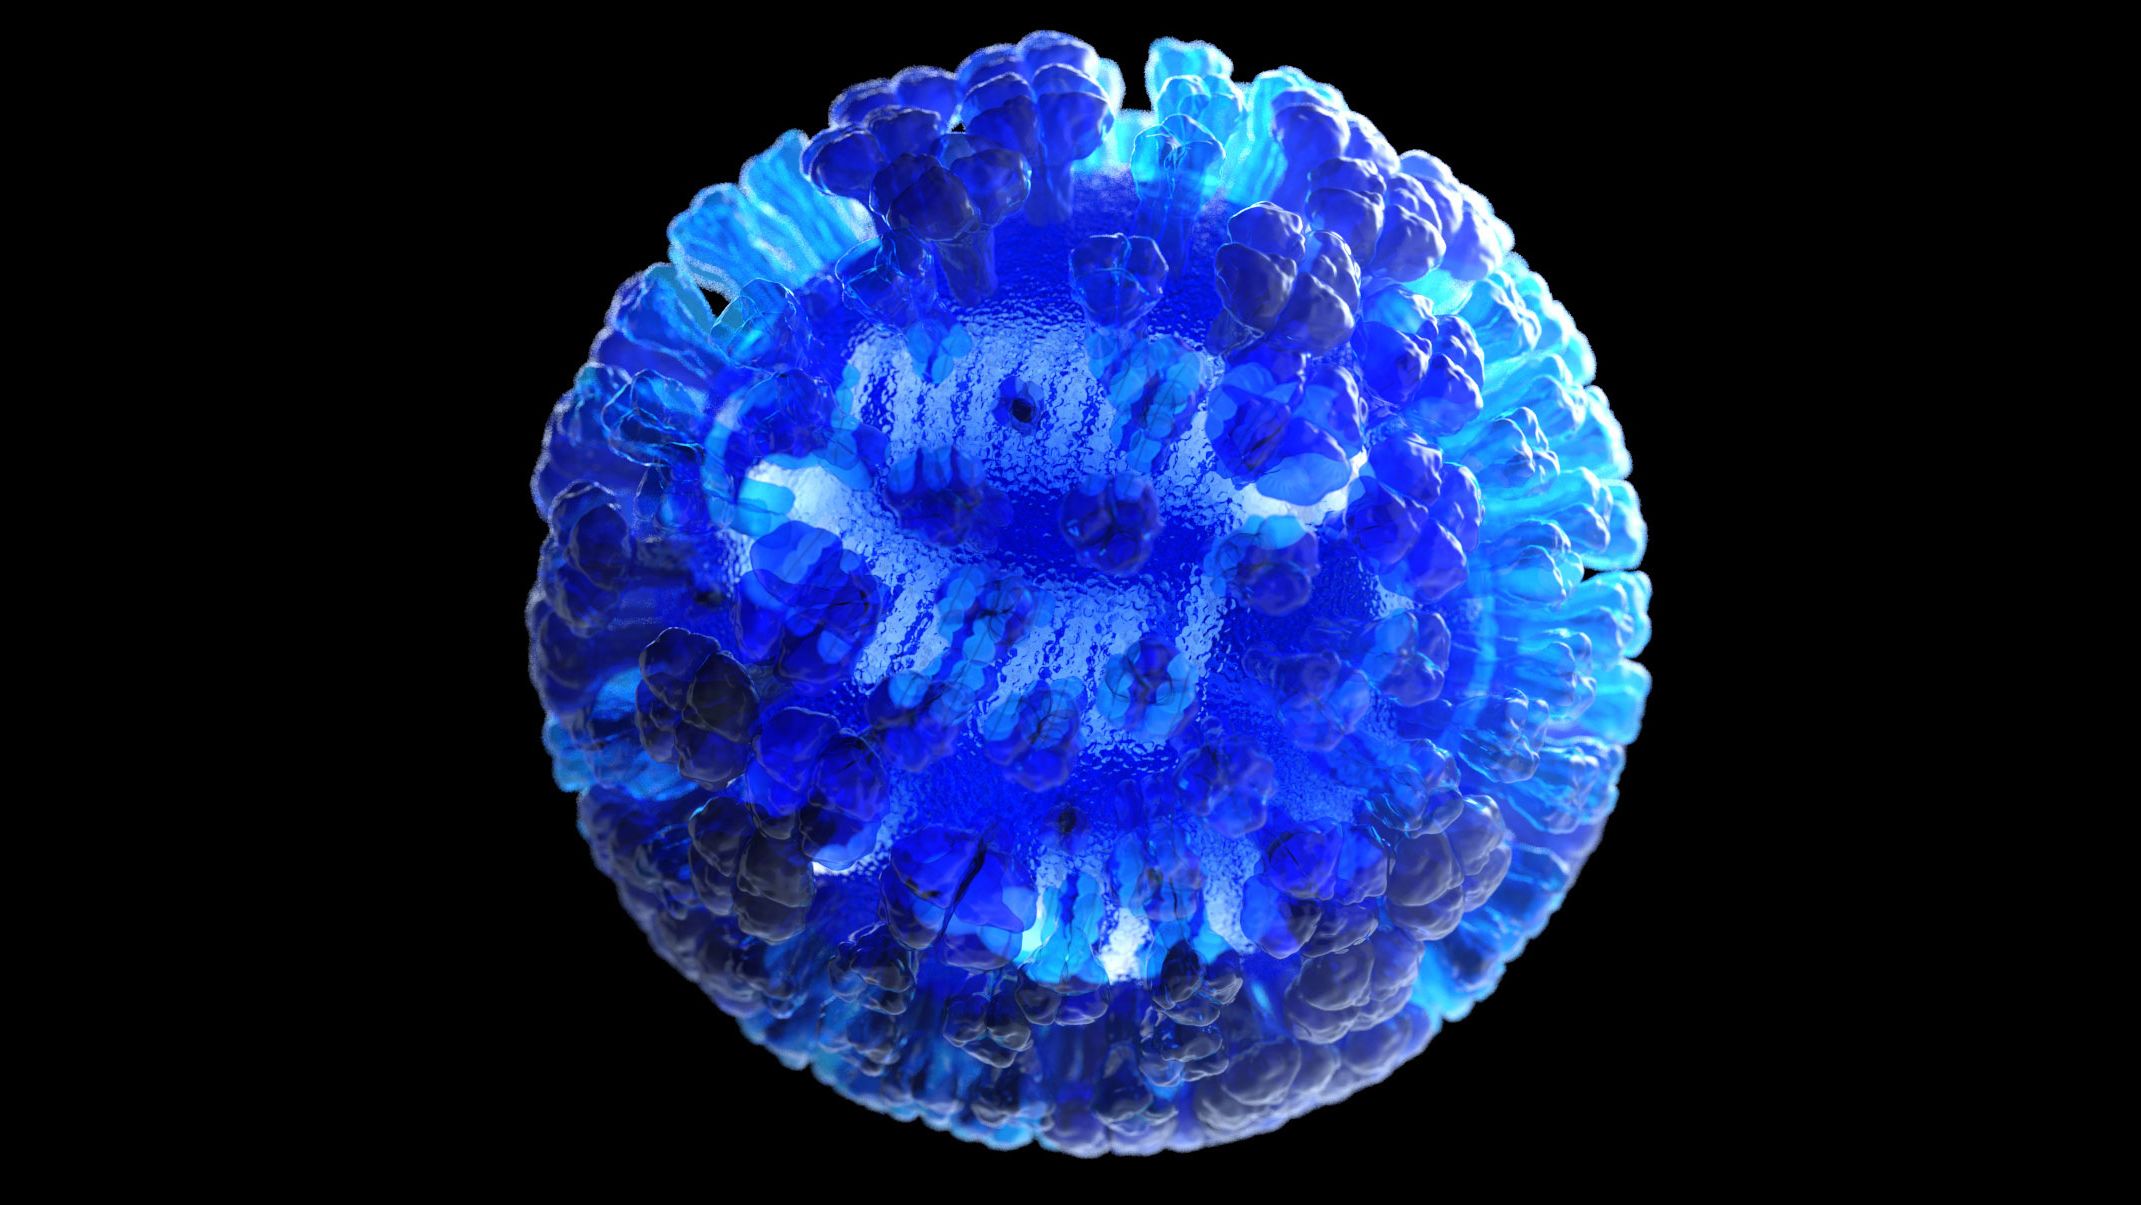 Dan Higgins created this CDC illustration that depicts a 3D computer-generated rendering of a whole influenza virus.